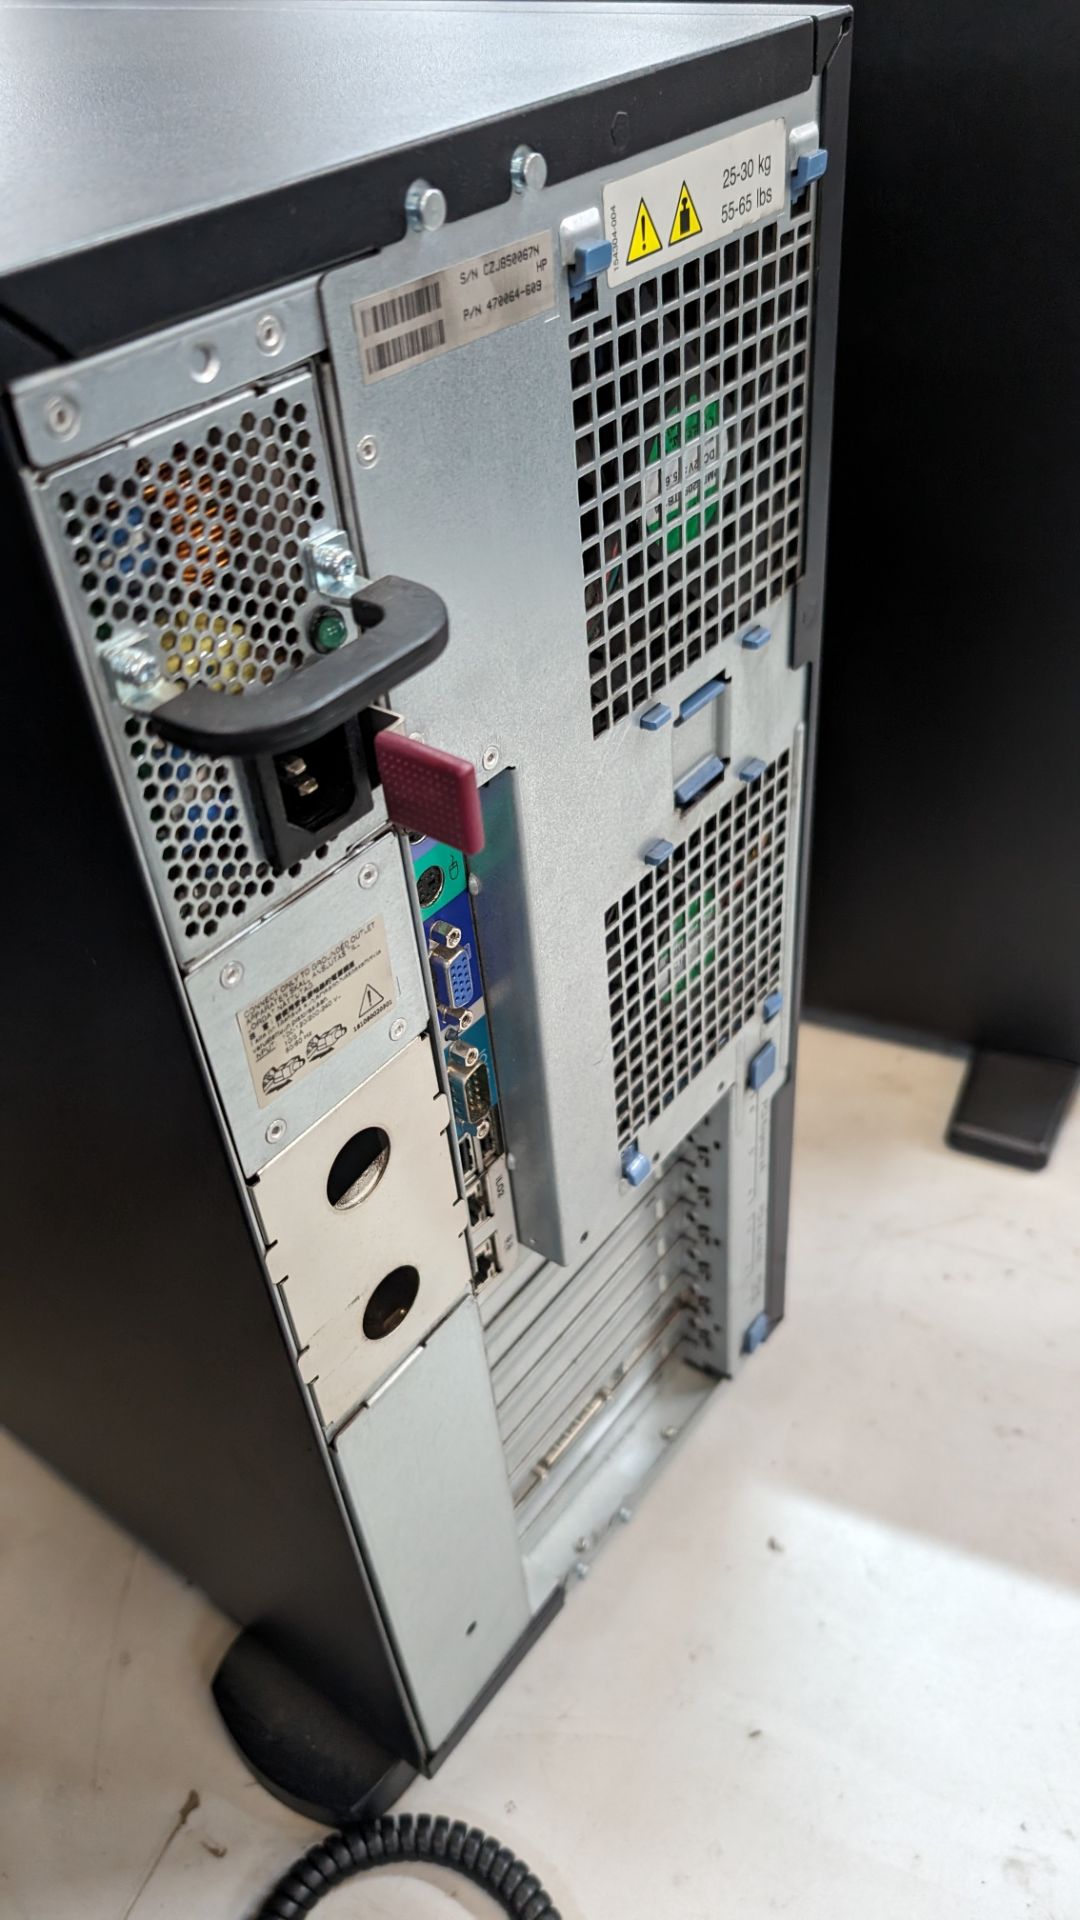 HP server incorporating 2 off hot swap drives, optical drive & HP Storageworks DAT 160 tape drive - Image 8 of 15